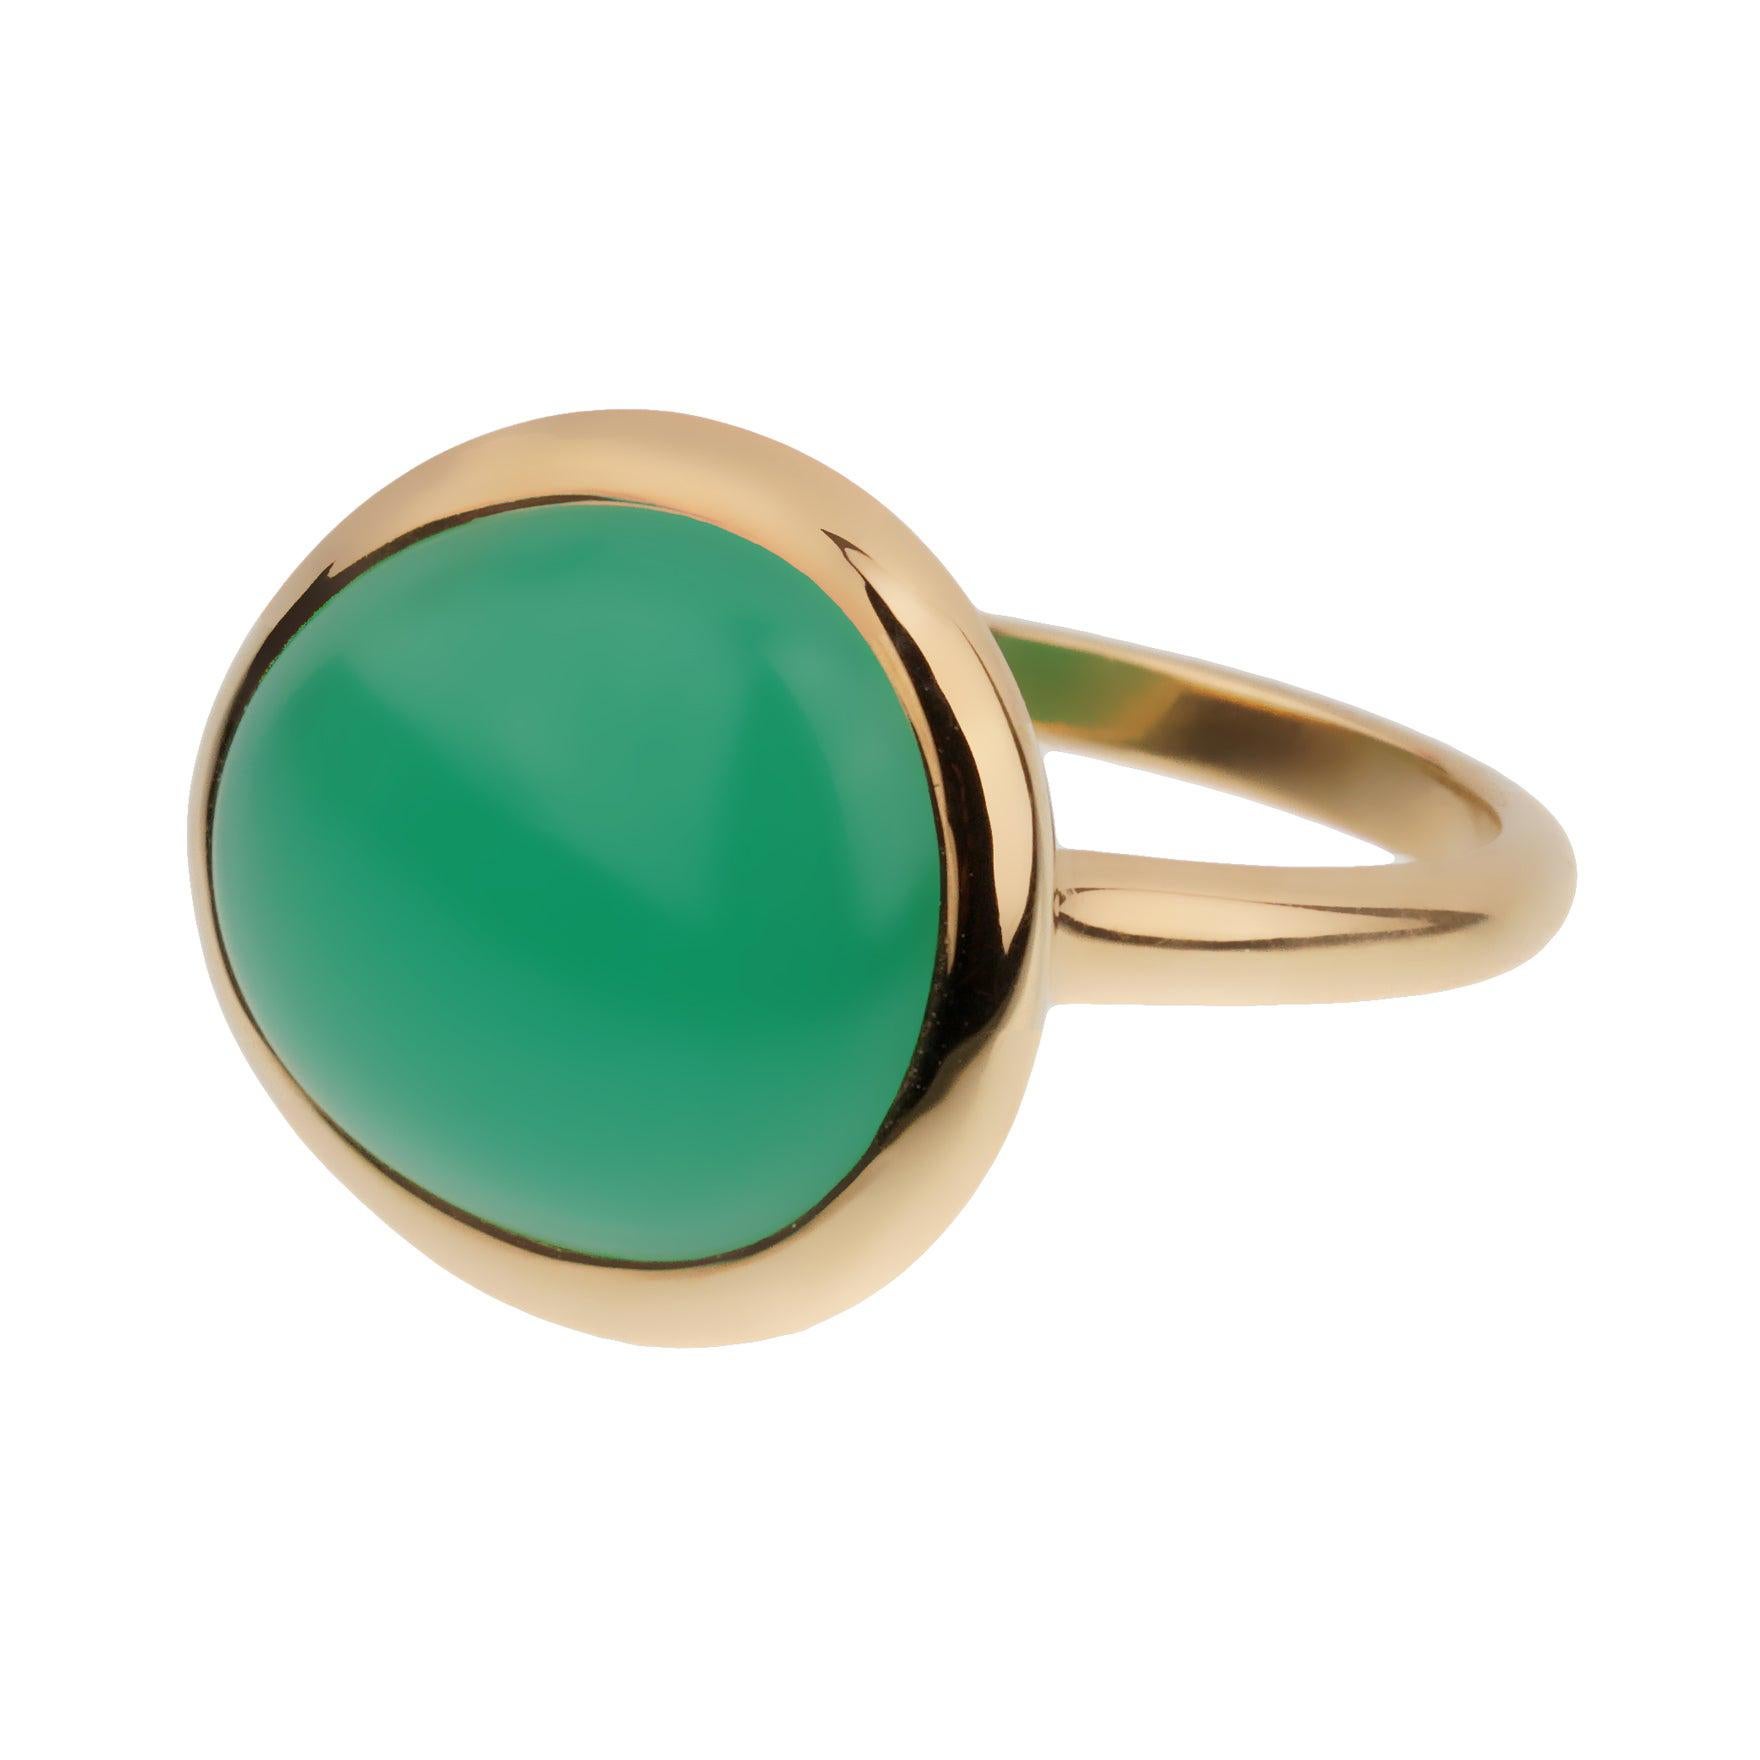 Fred of Paris 7ct Chrysophase Cabochon Yellow Gold Cocktail Ring